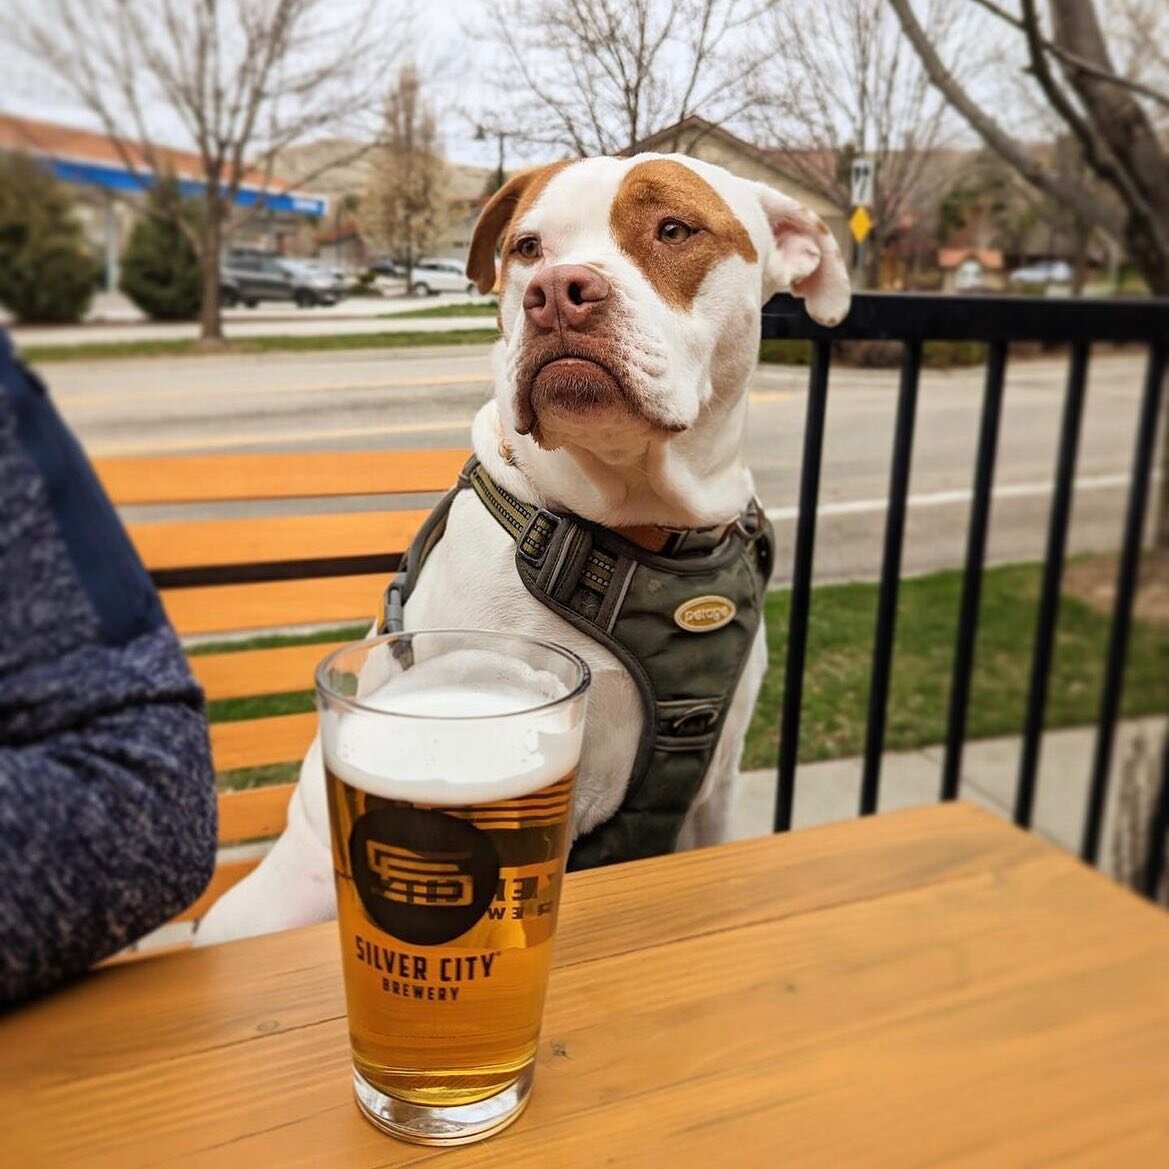 Elmer out here just enjoying the patio days @lucky13pizza